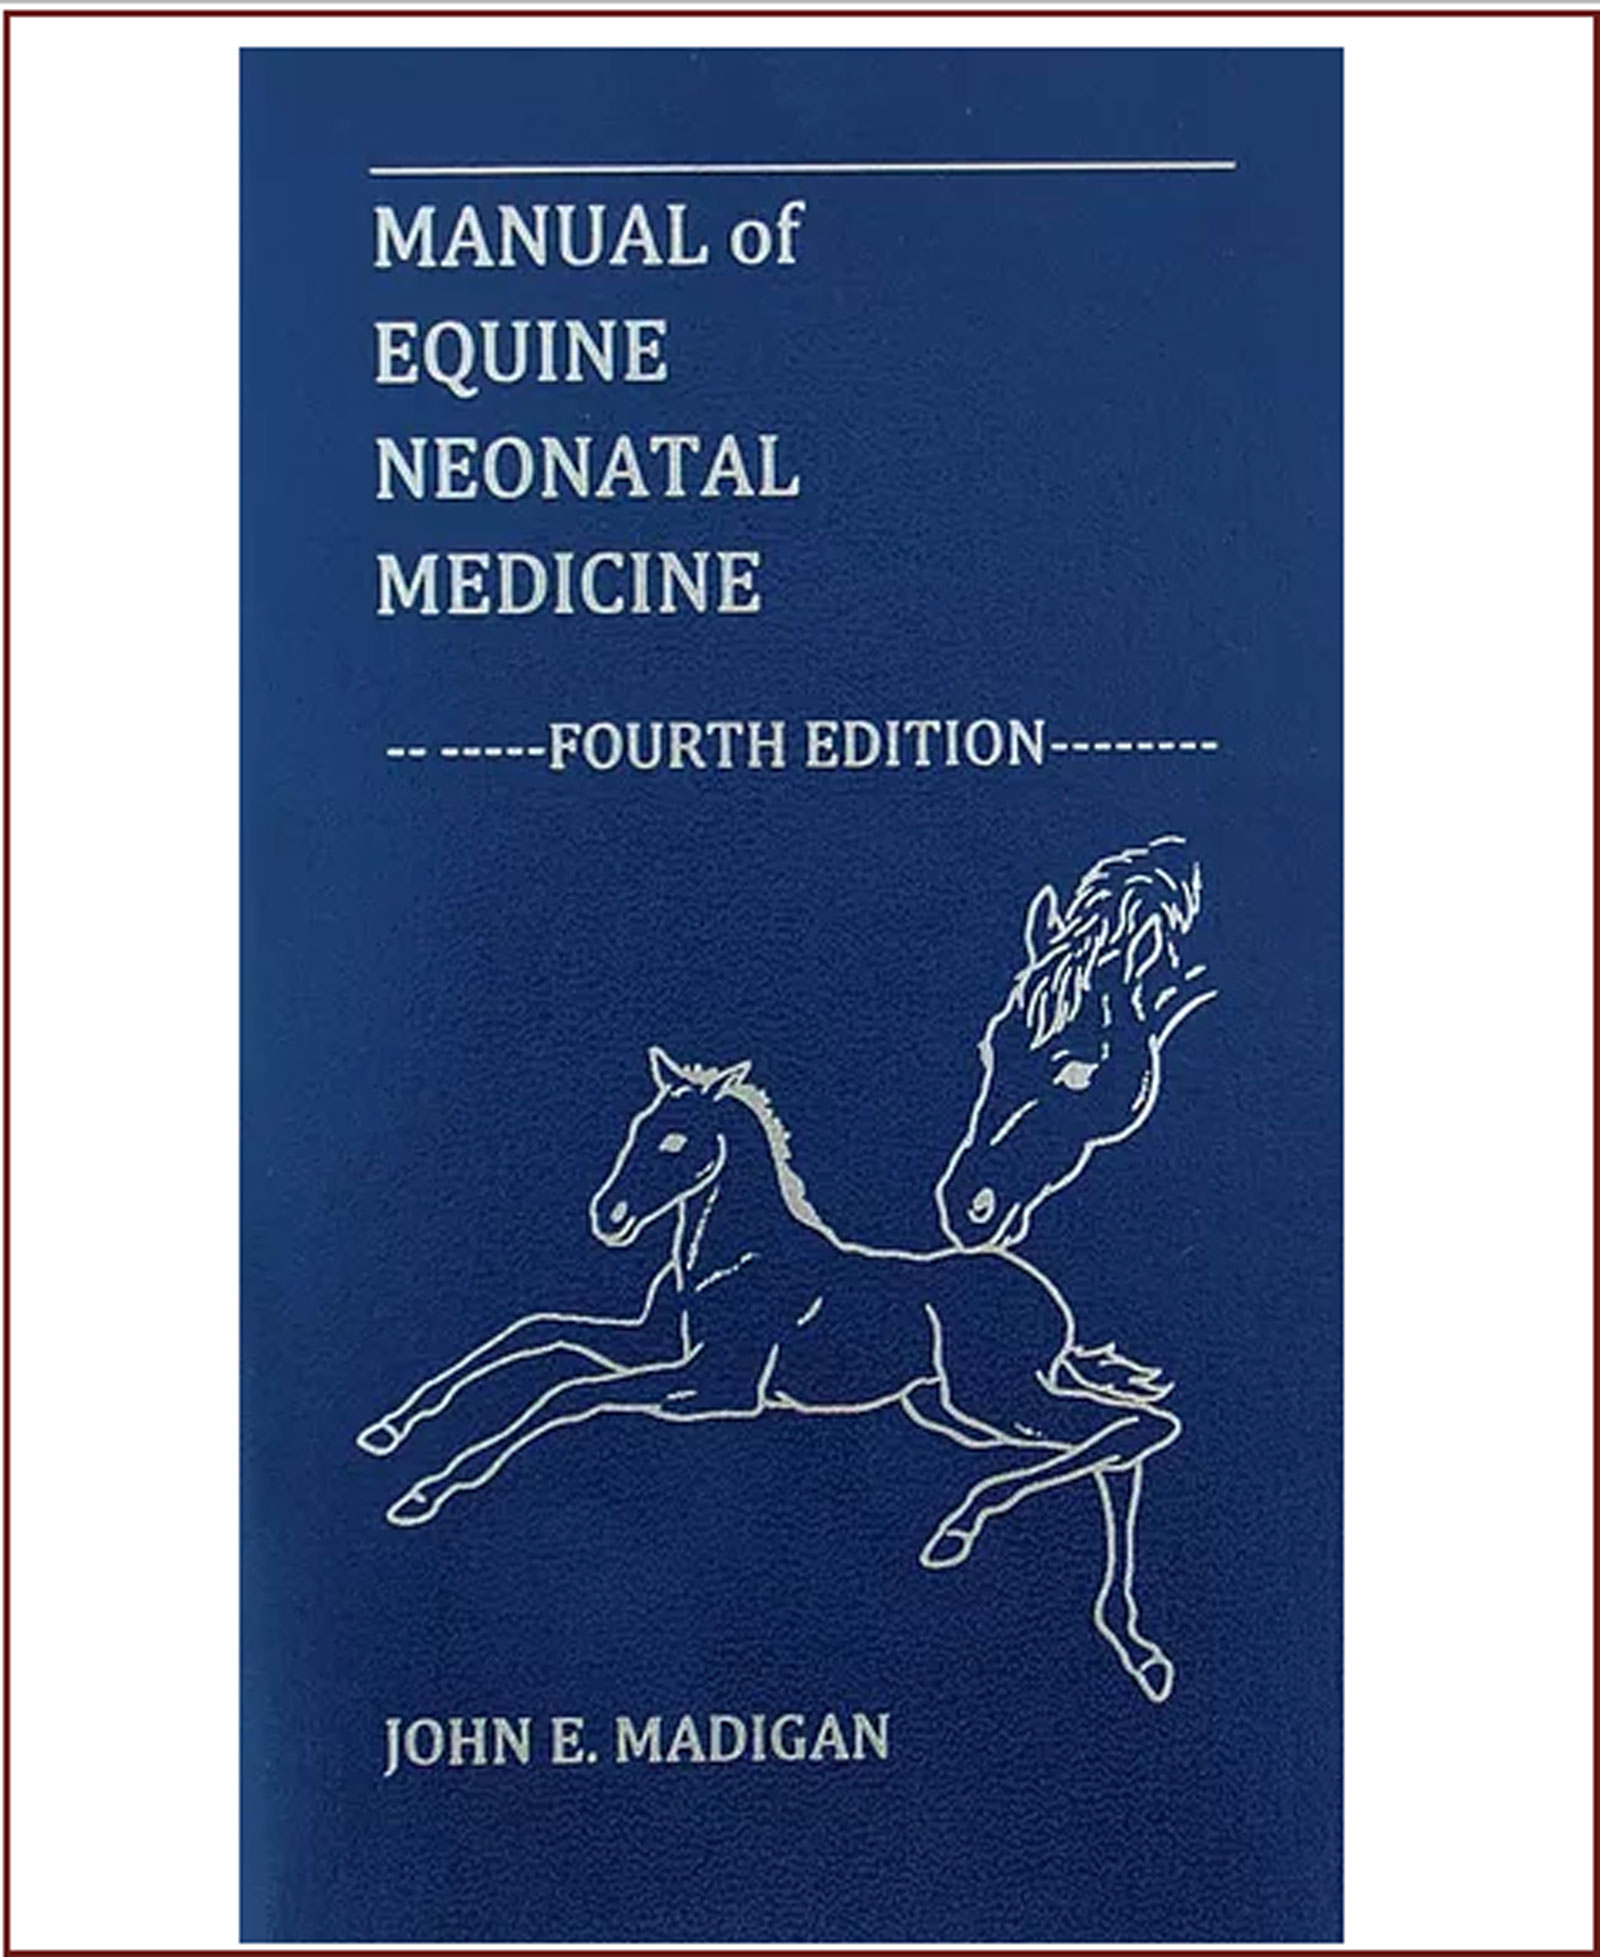 New Chapter Available from Manual of Equine Neonatal Medicine 